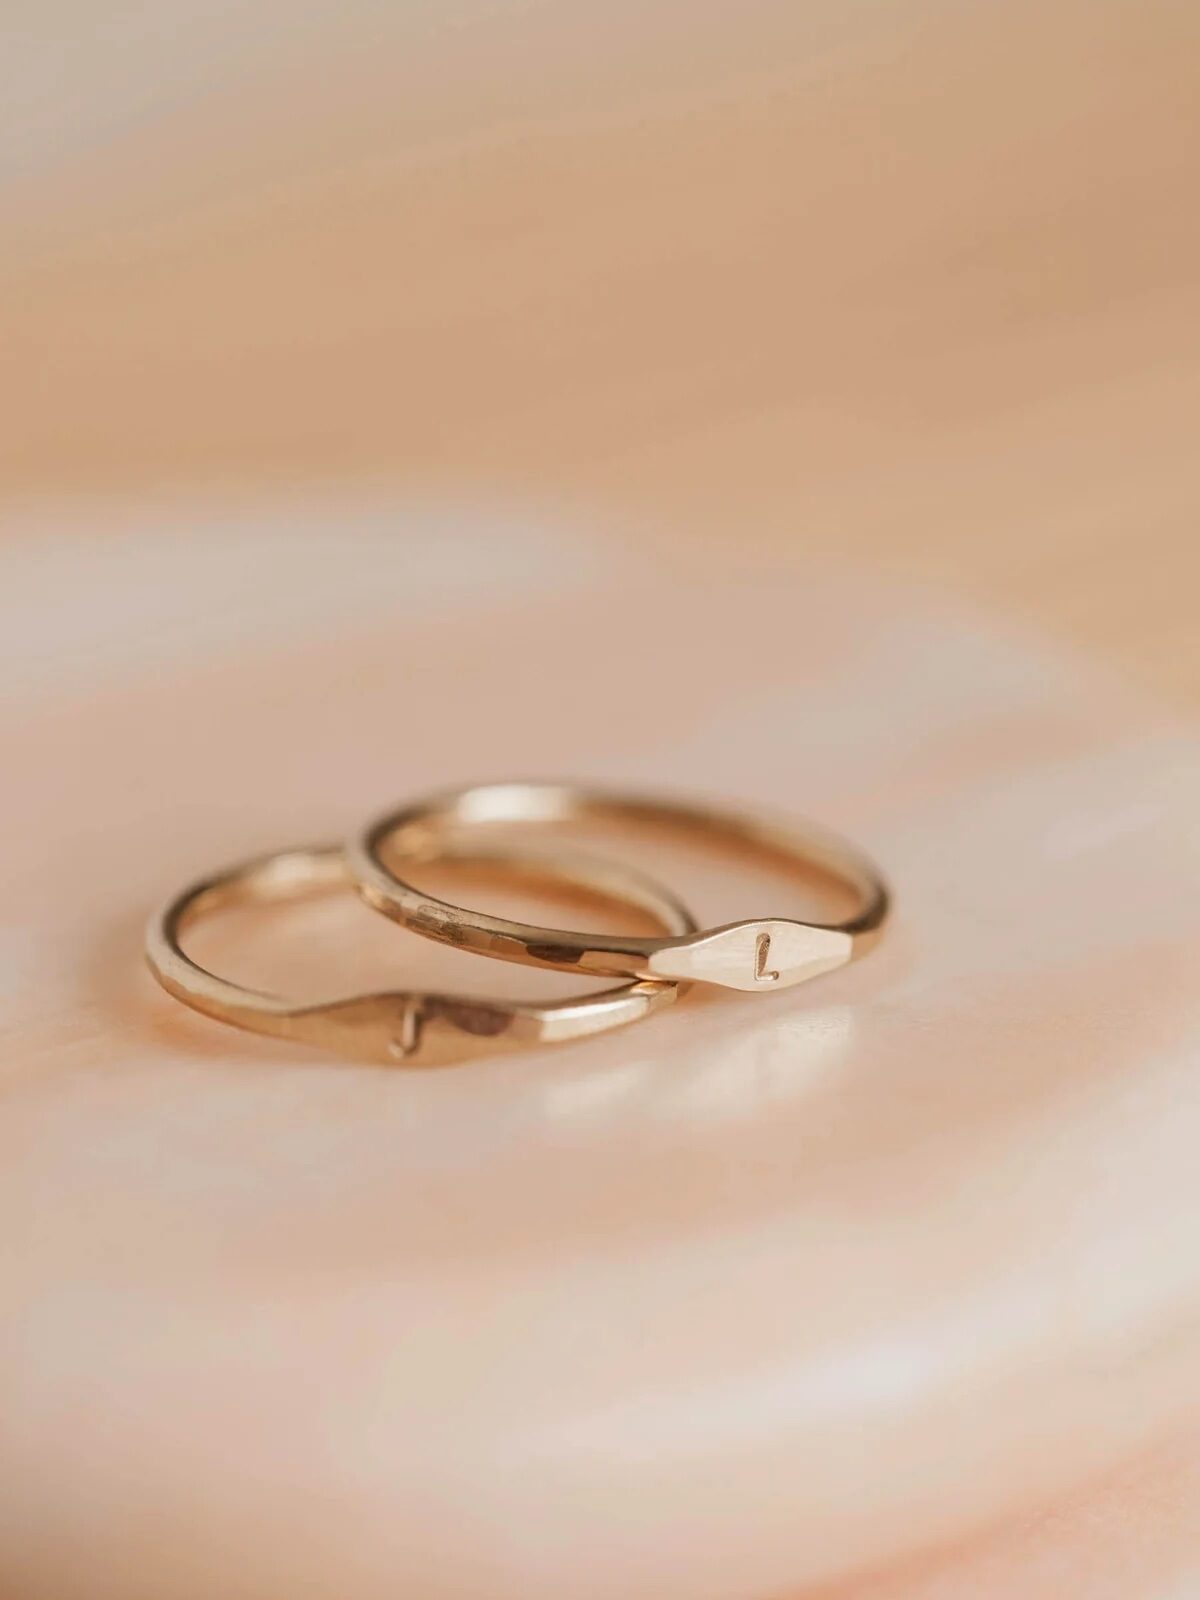 Two small gold signet rings with the letters "L" and "J" are stacked on a table.